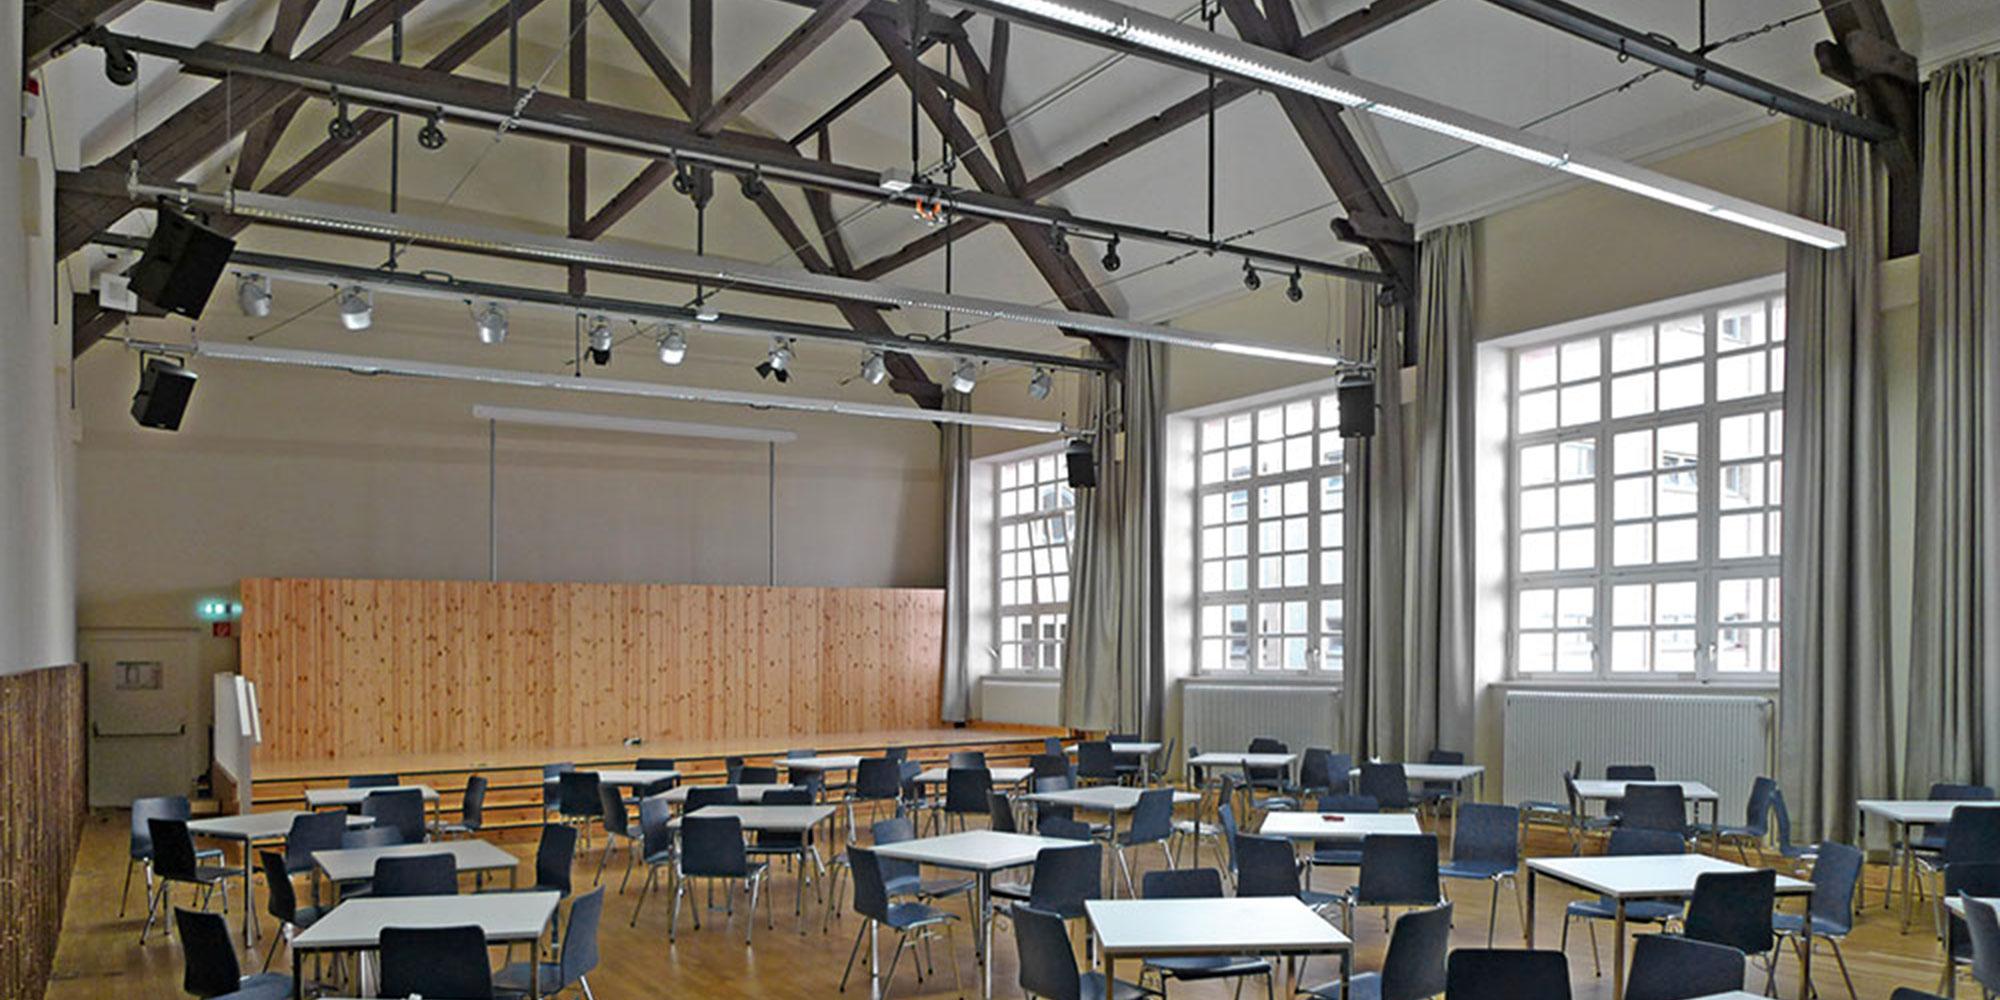 Dining hall in the old gymnasium